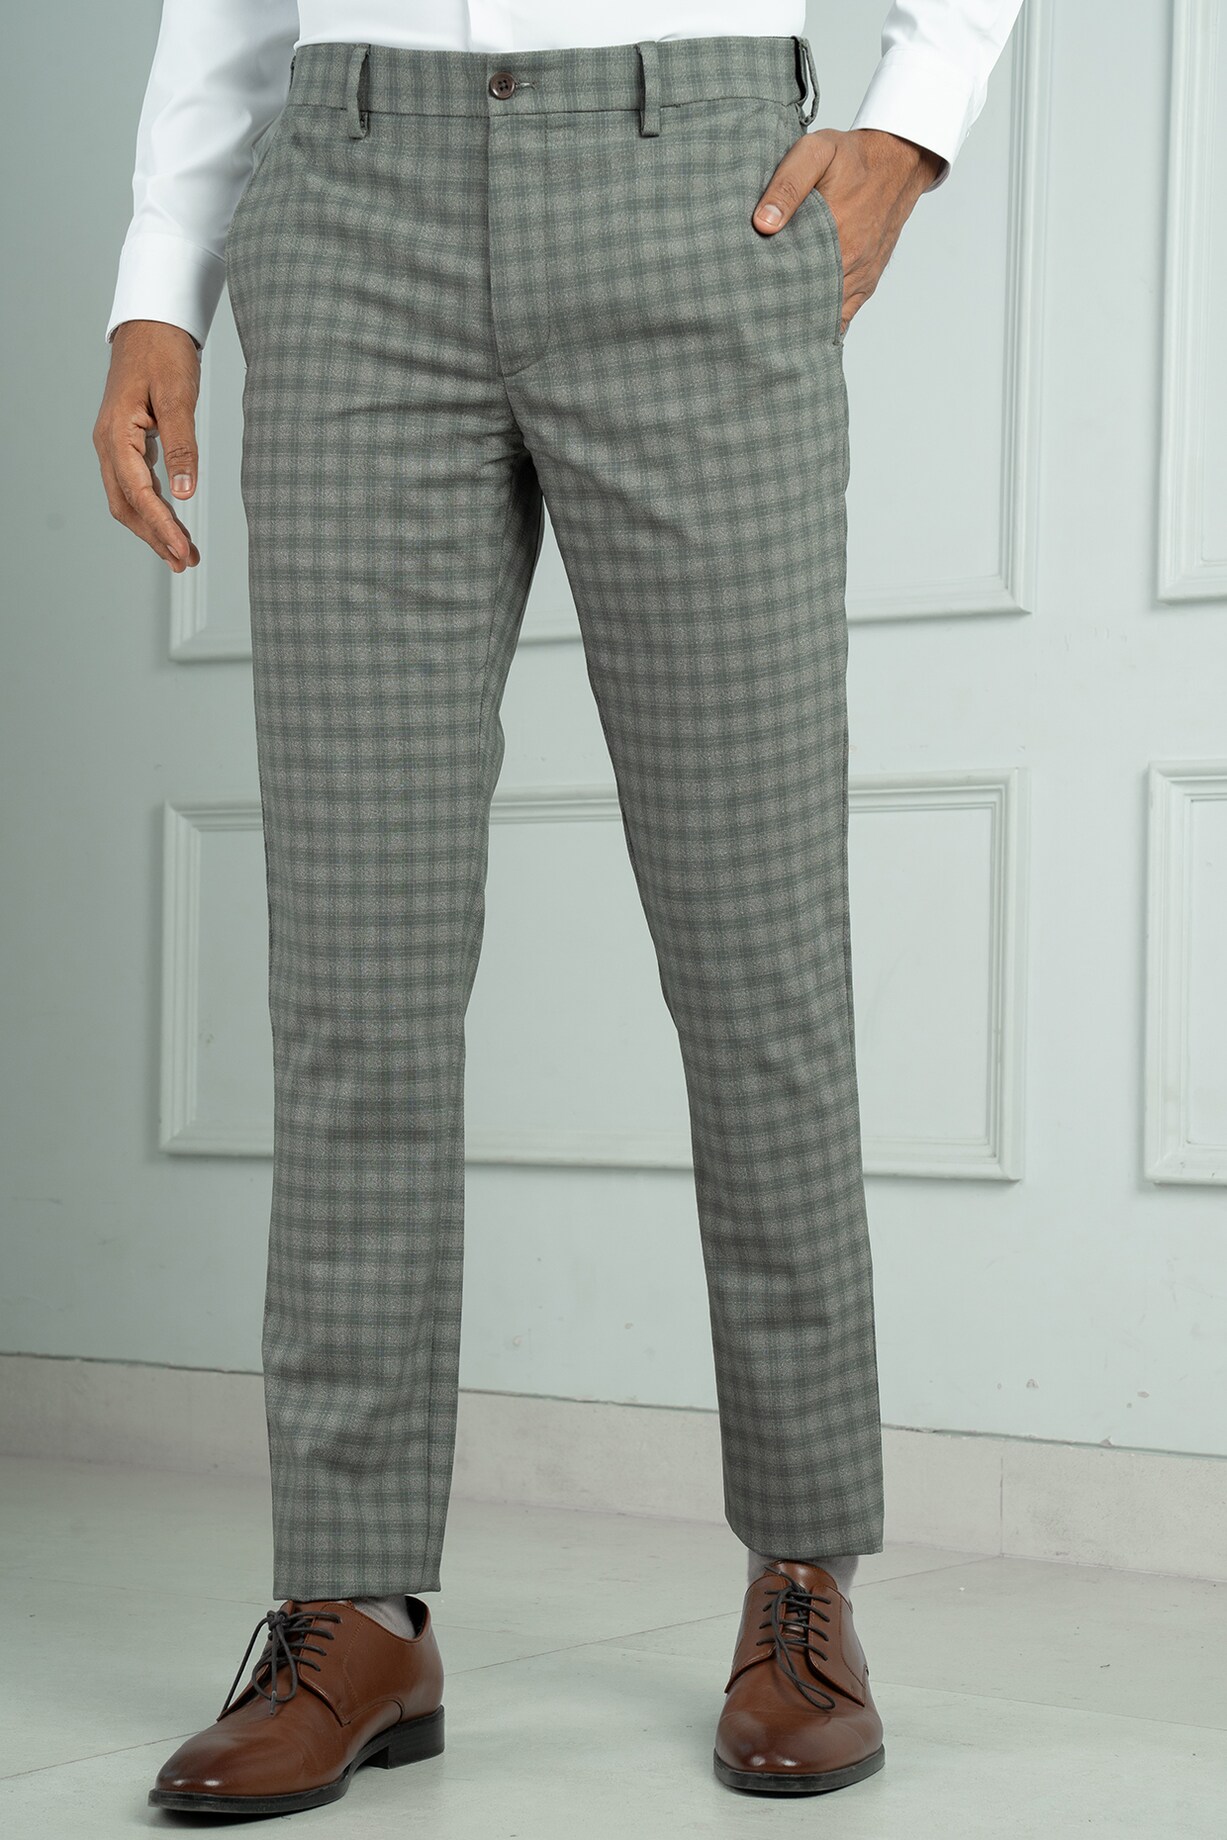 Evergreen Check Premium Merino Wool Pants (Slim Fit) by THE PANT PROJECT